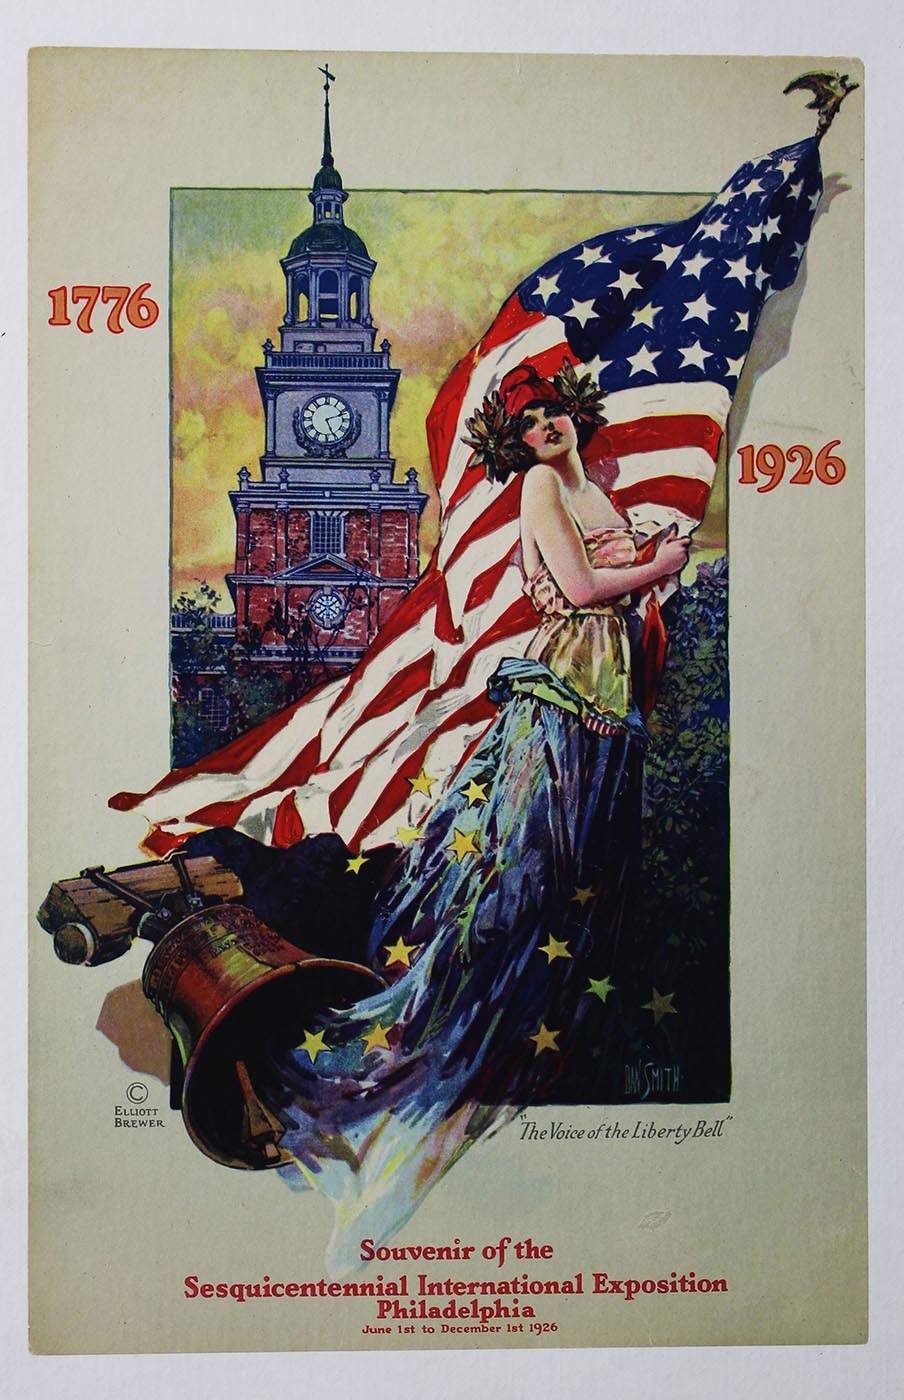 The Voice of the Liberty Bell, 1776–1926, poster created by Dan Smith and printed by Elliott Brewer, Philadelphia, 1926. (The Gilder Lehrman Institute, GLC09657)